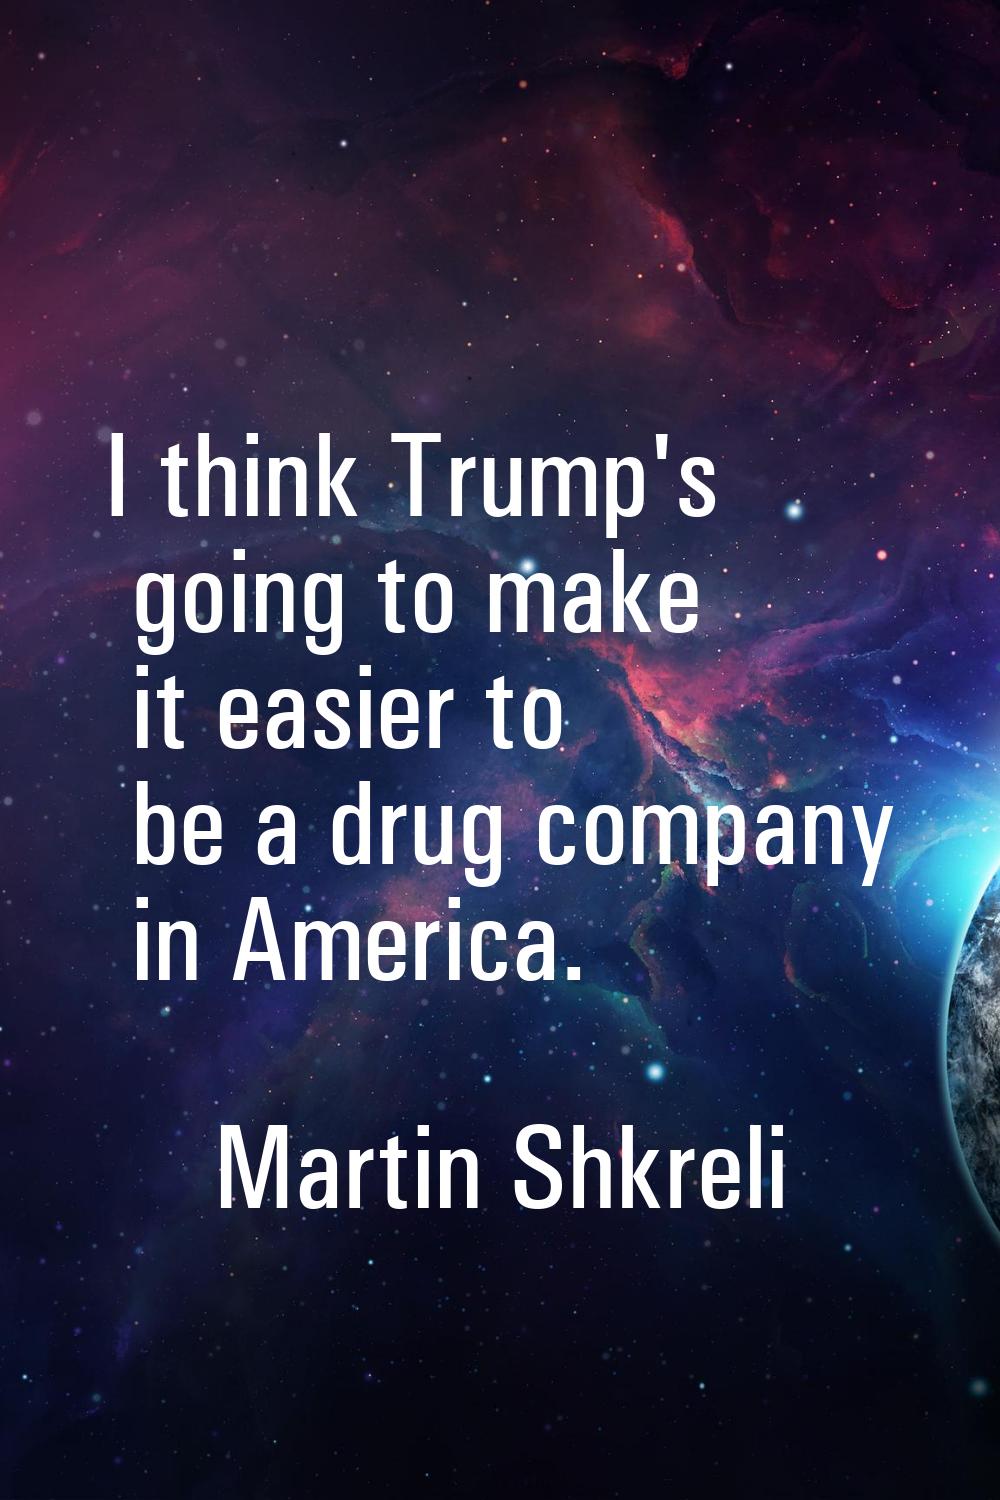 I think Trump's going to make it easier to be a drug company in America.